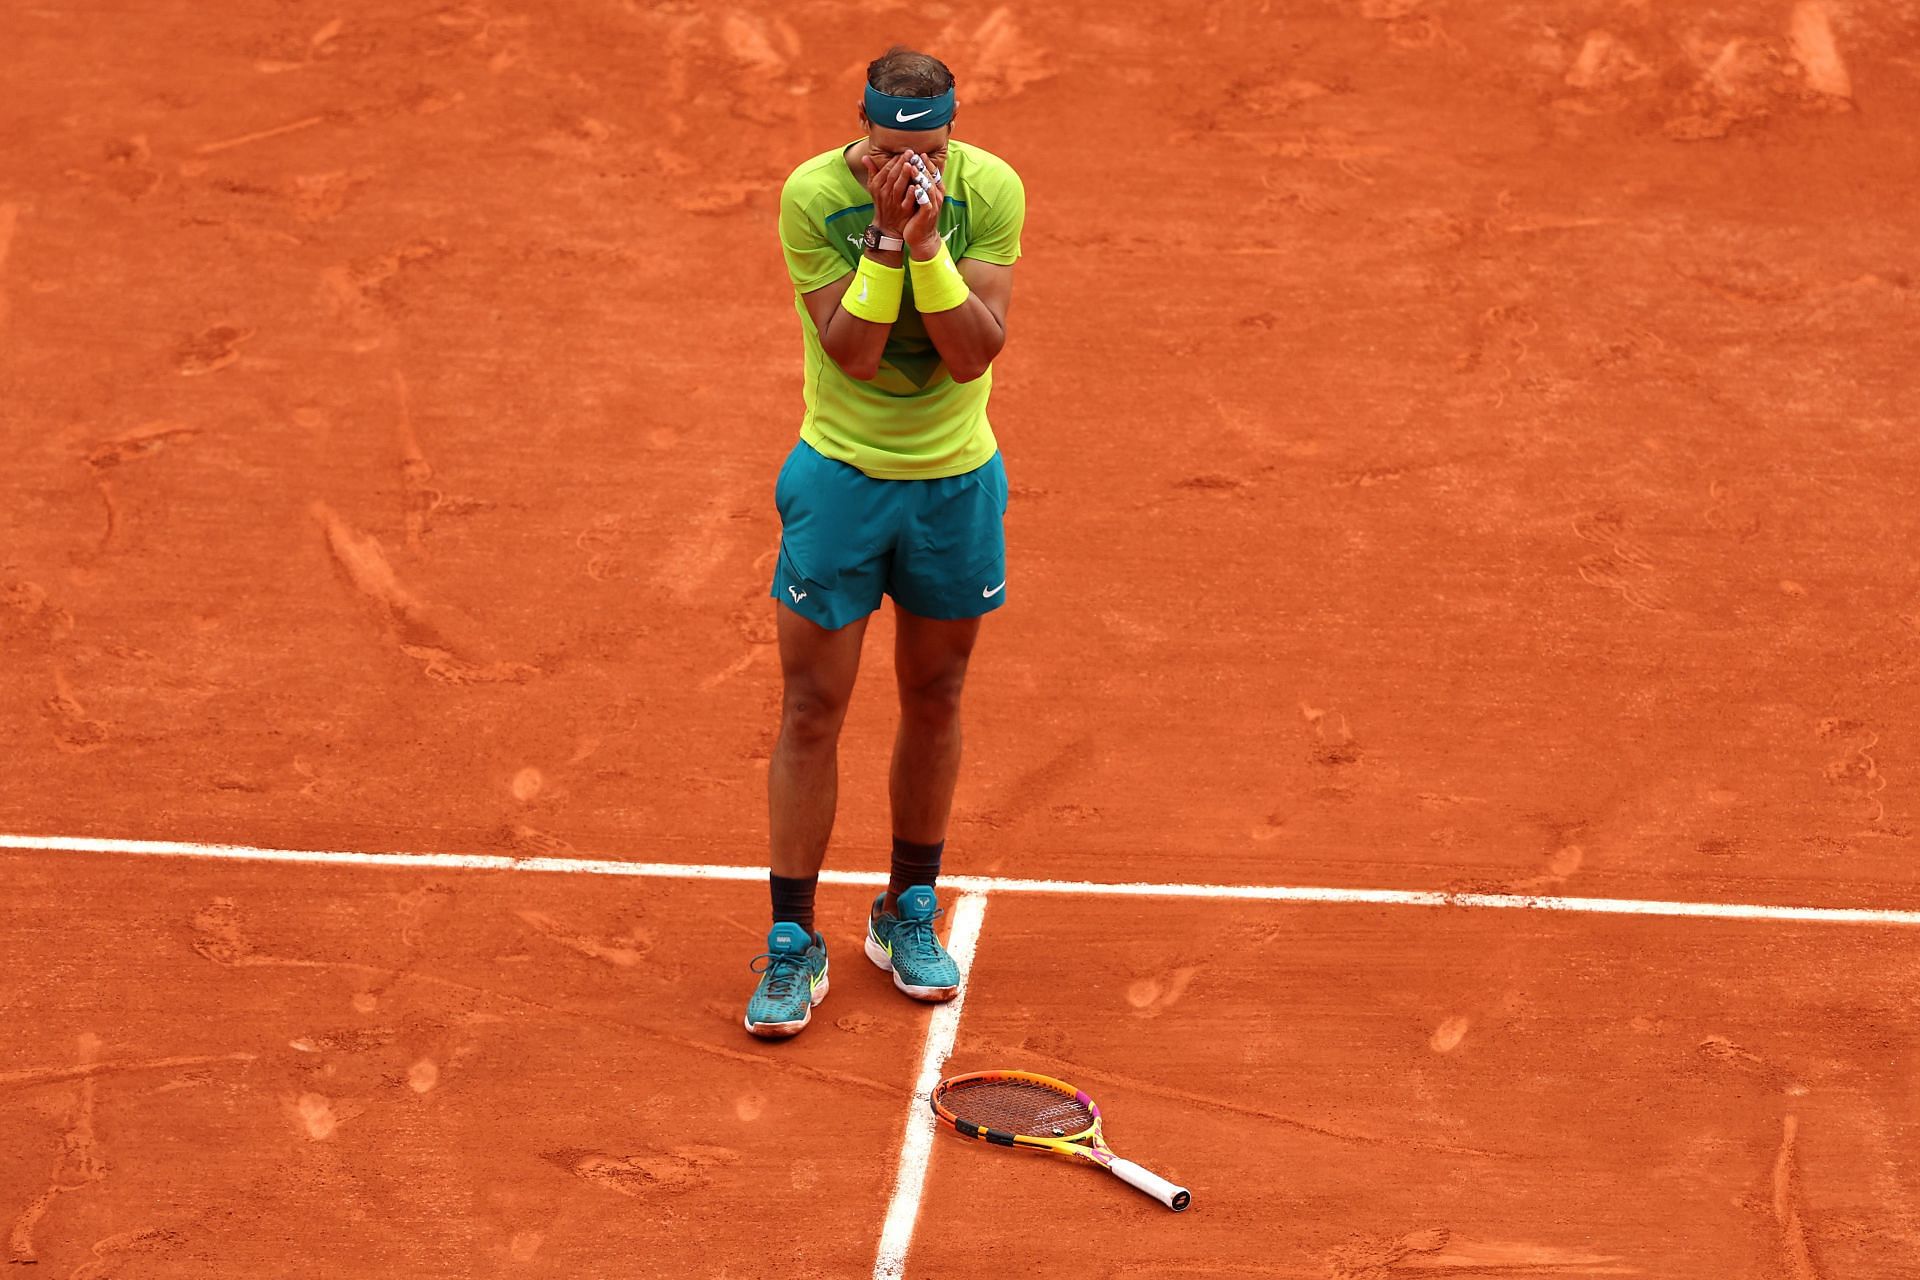 An emotional Nadal after winning his 22nd Grand Slam title